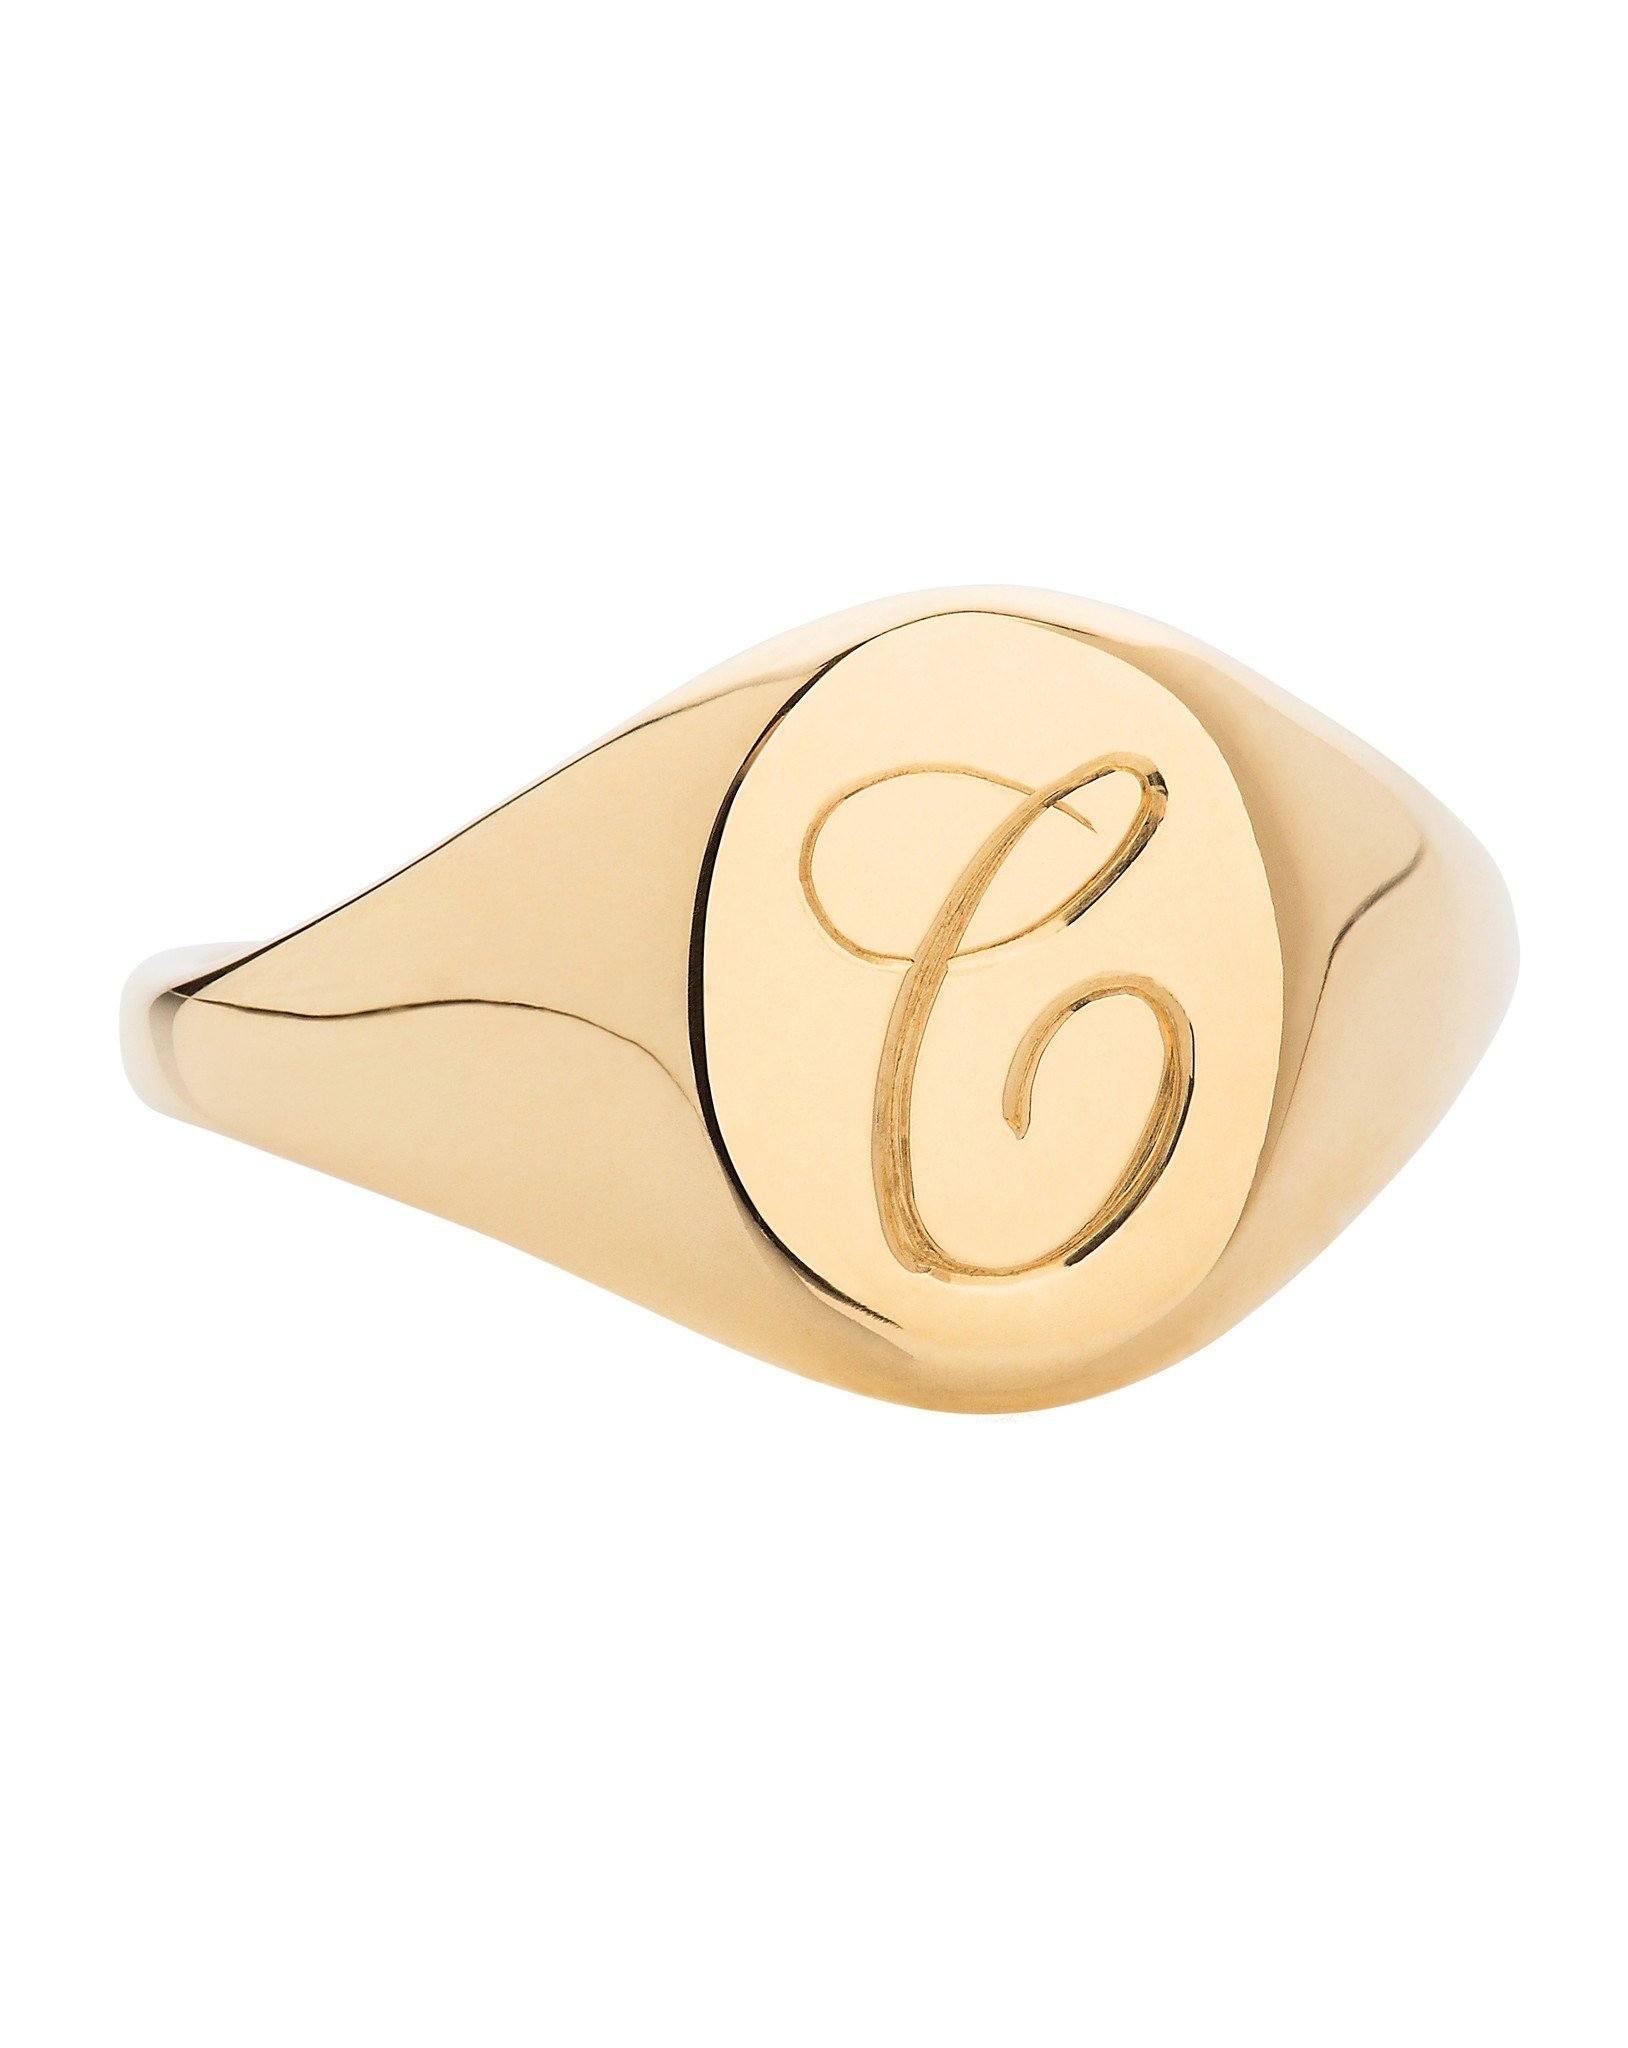 Silver Family Crest Engraved Signet Ring By Badger & Brown